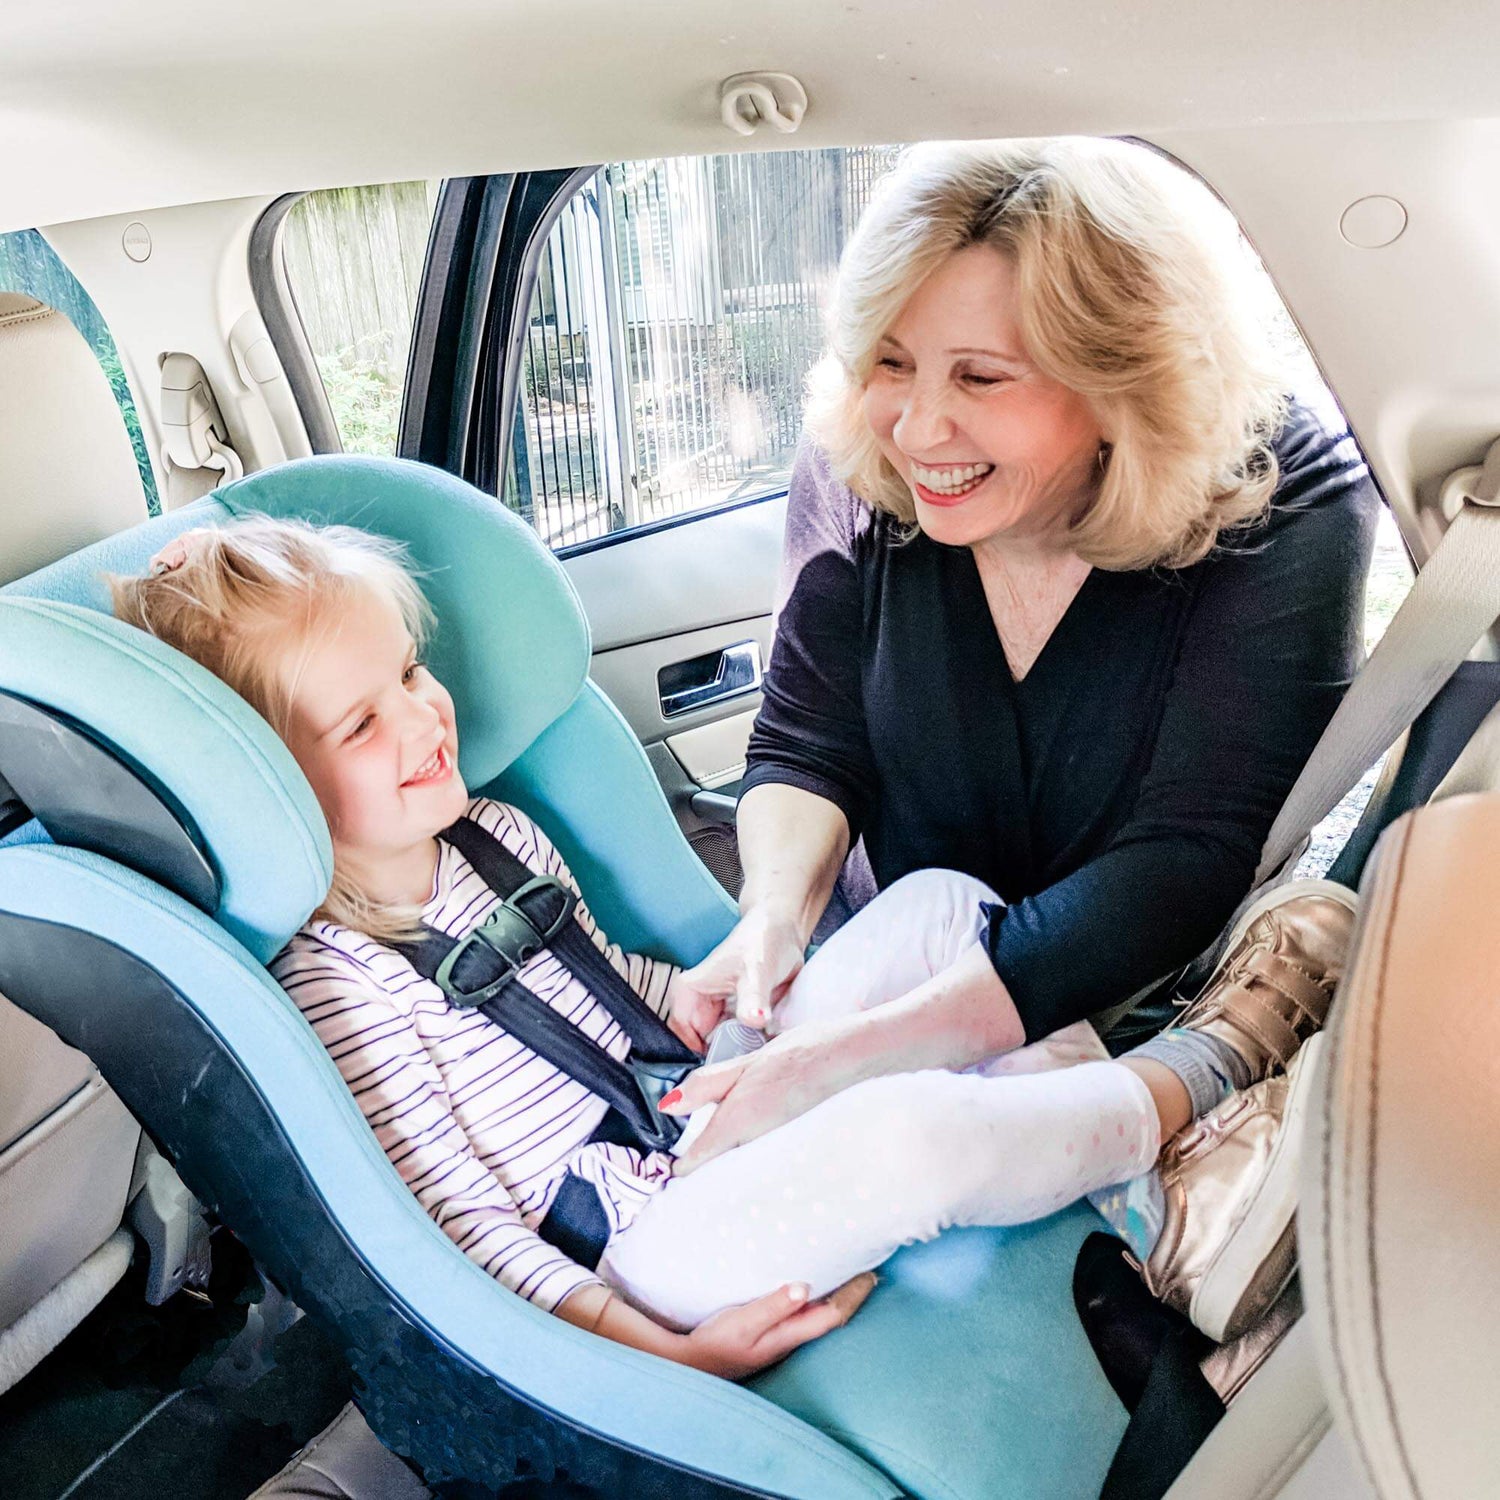 No Pinch Me™ Car Seat Buckle Shield-prevents Accidental Pinching